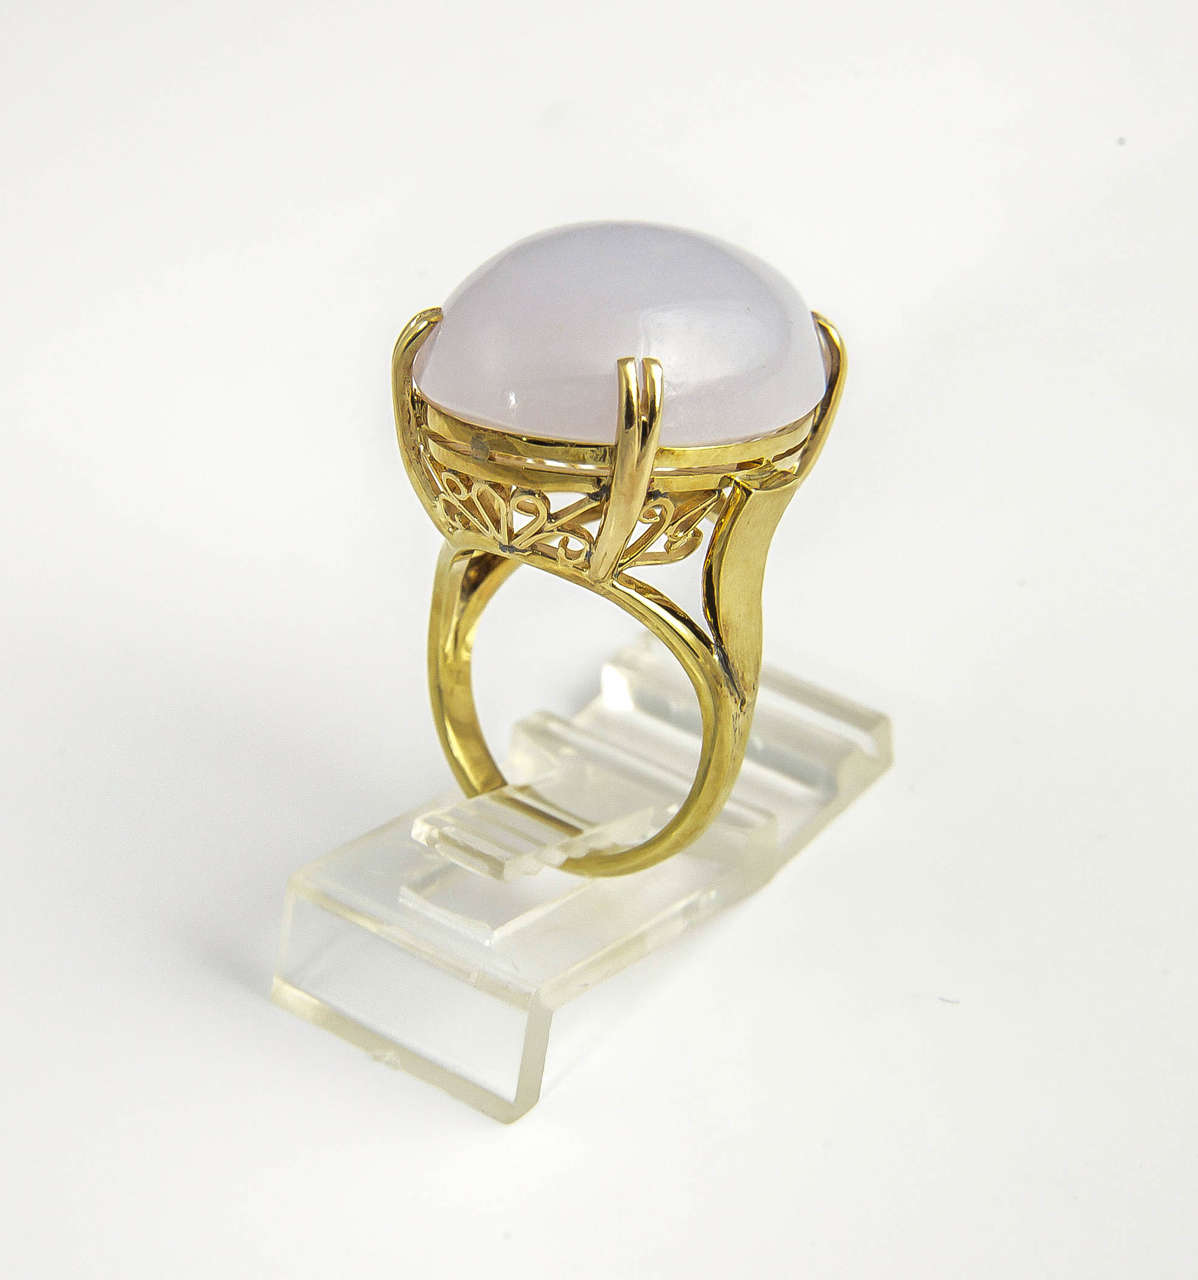 Lovely piece of lavender jade mounted in a 14k yellow gold mounting.  The mounting has beautiful design work along the bottom.

US size 6 - 6.25